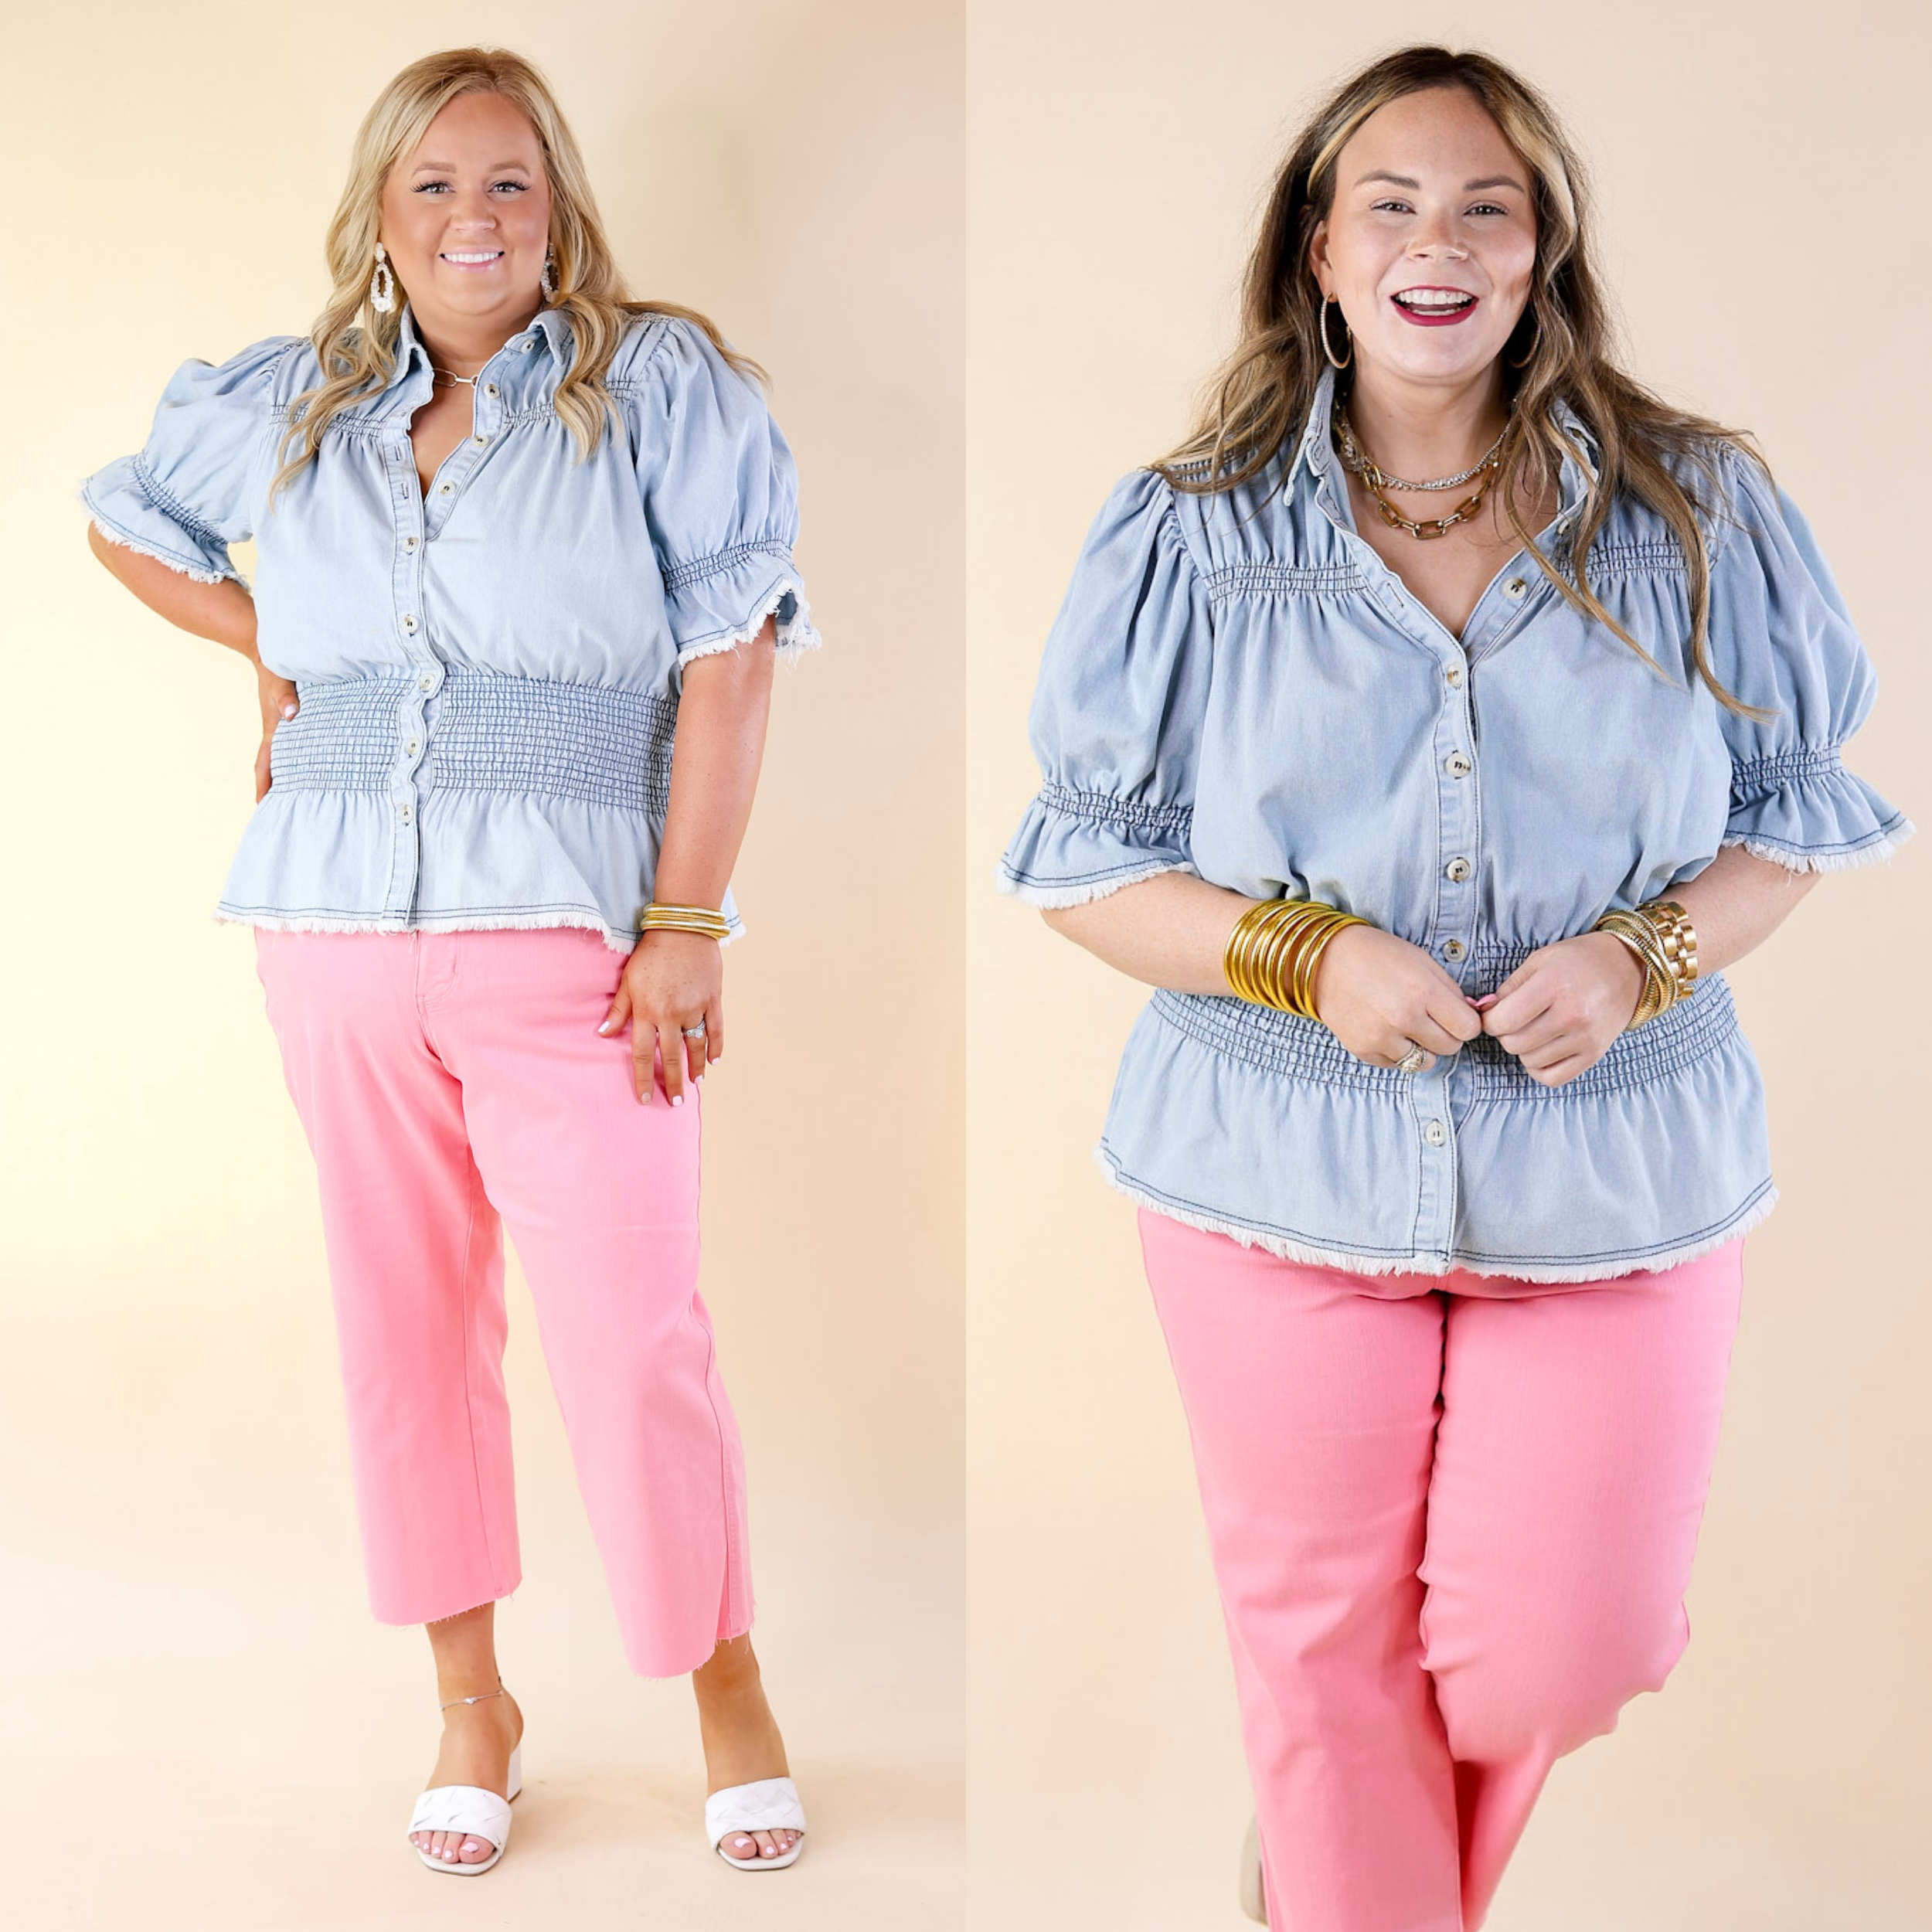 Divine Spark Denim Button Up Peplum Top with Raw Hem in Light Wash - Giddy Up Glamour Boutique